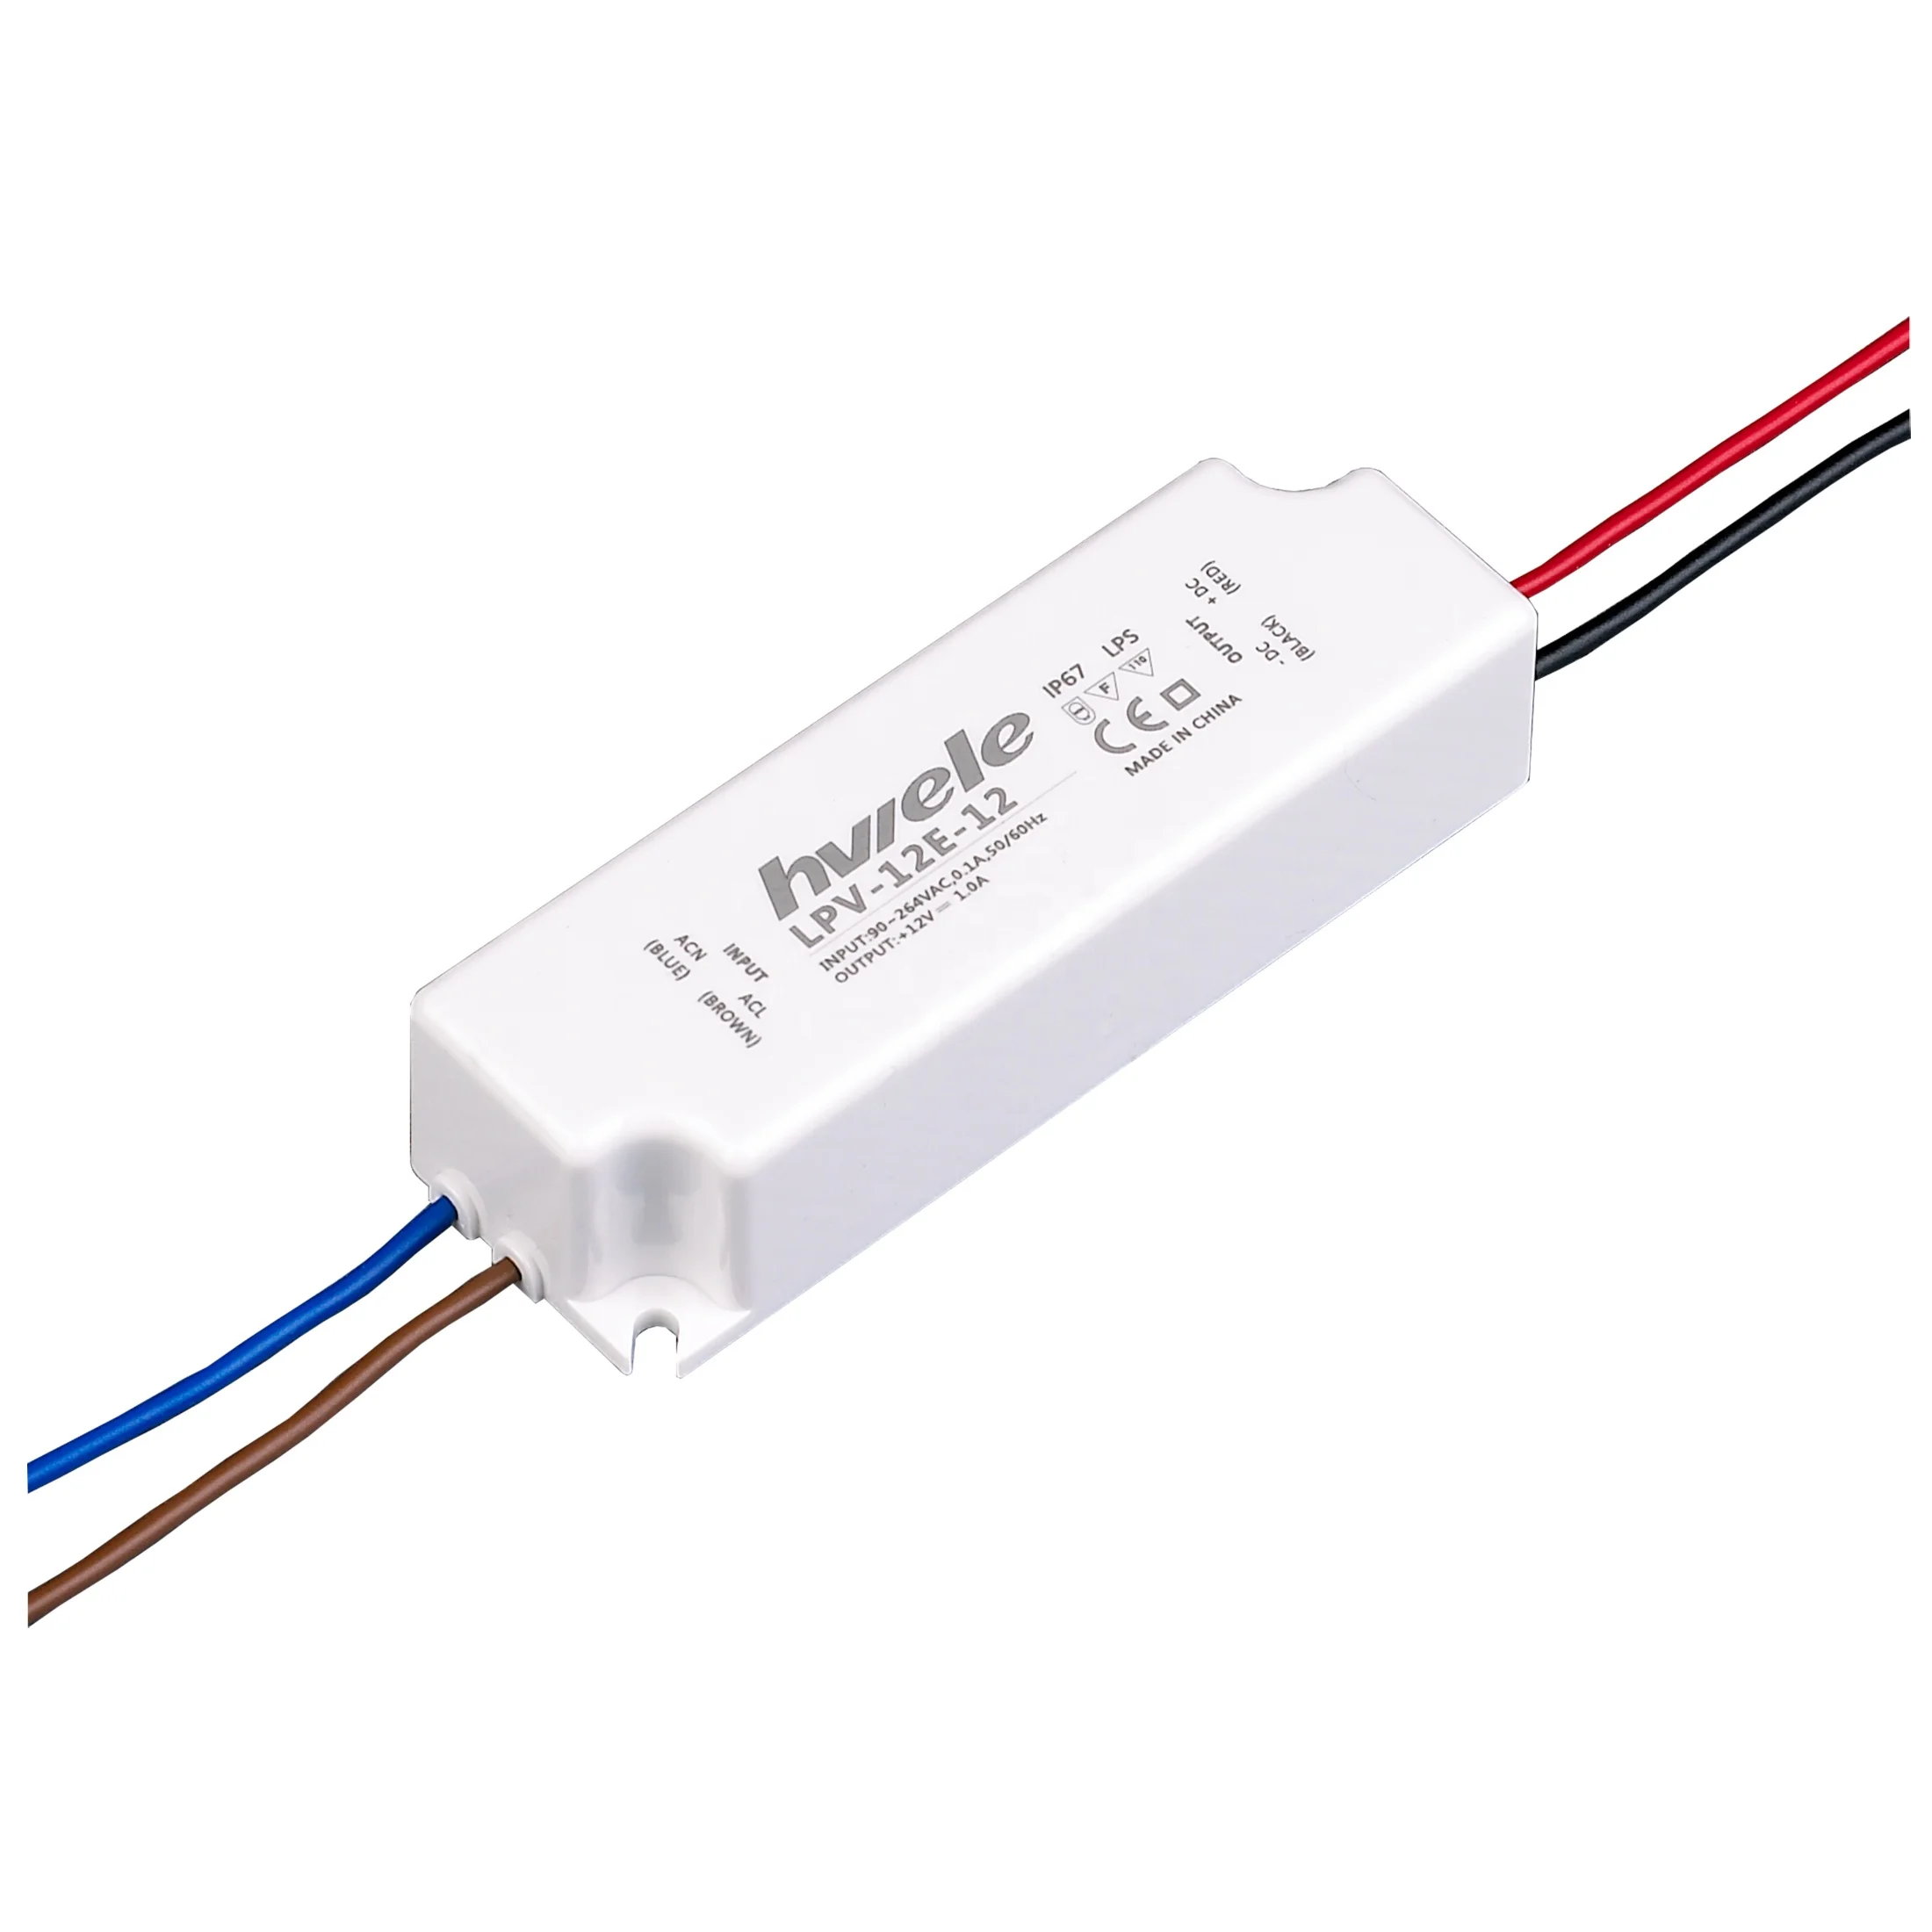 Waterproof Constant Voltage Power Supply LED Driver Transformer 12W 0.5A 24V 